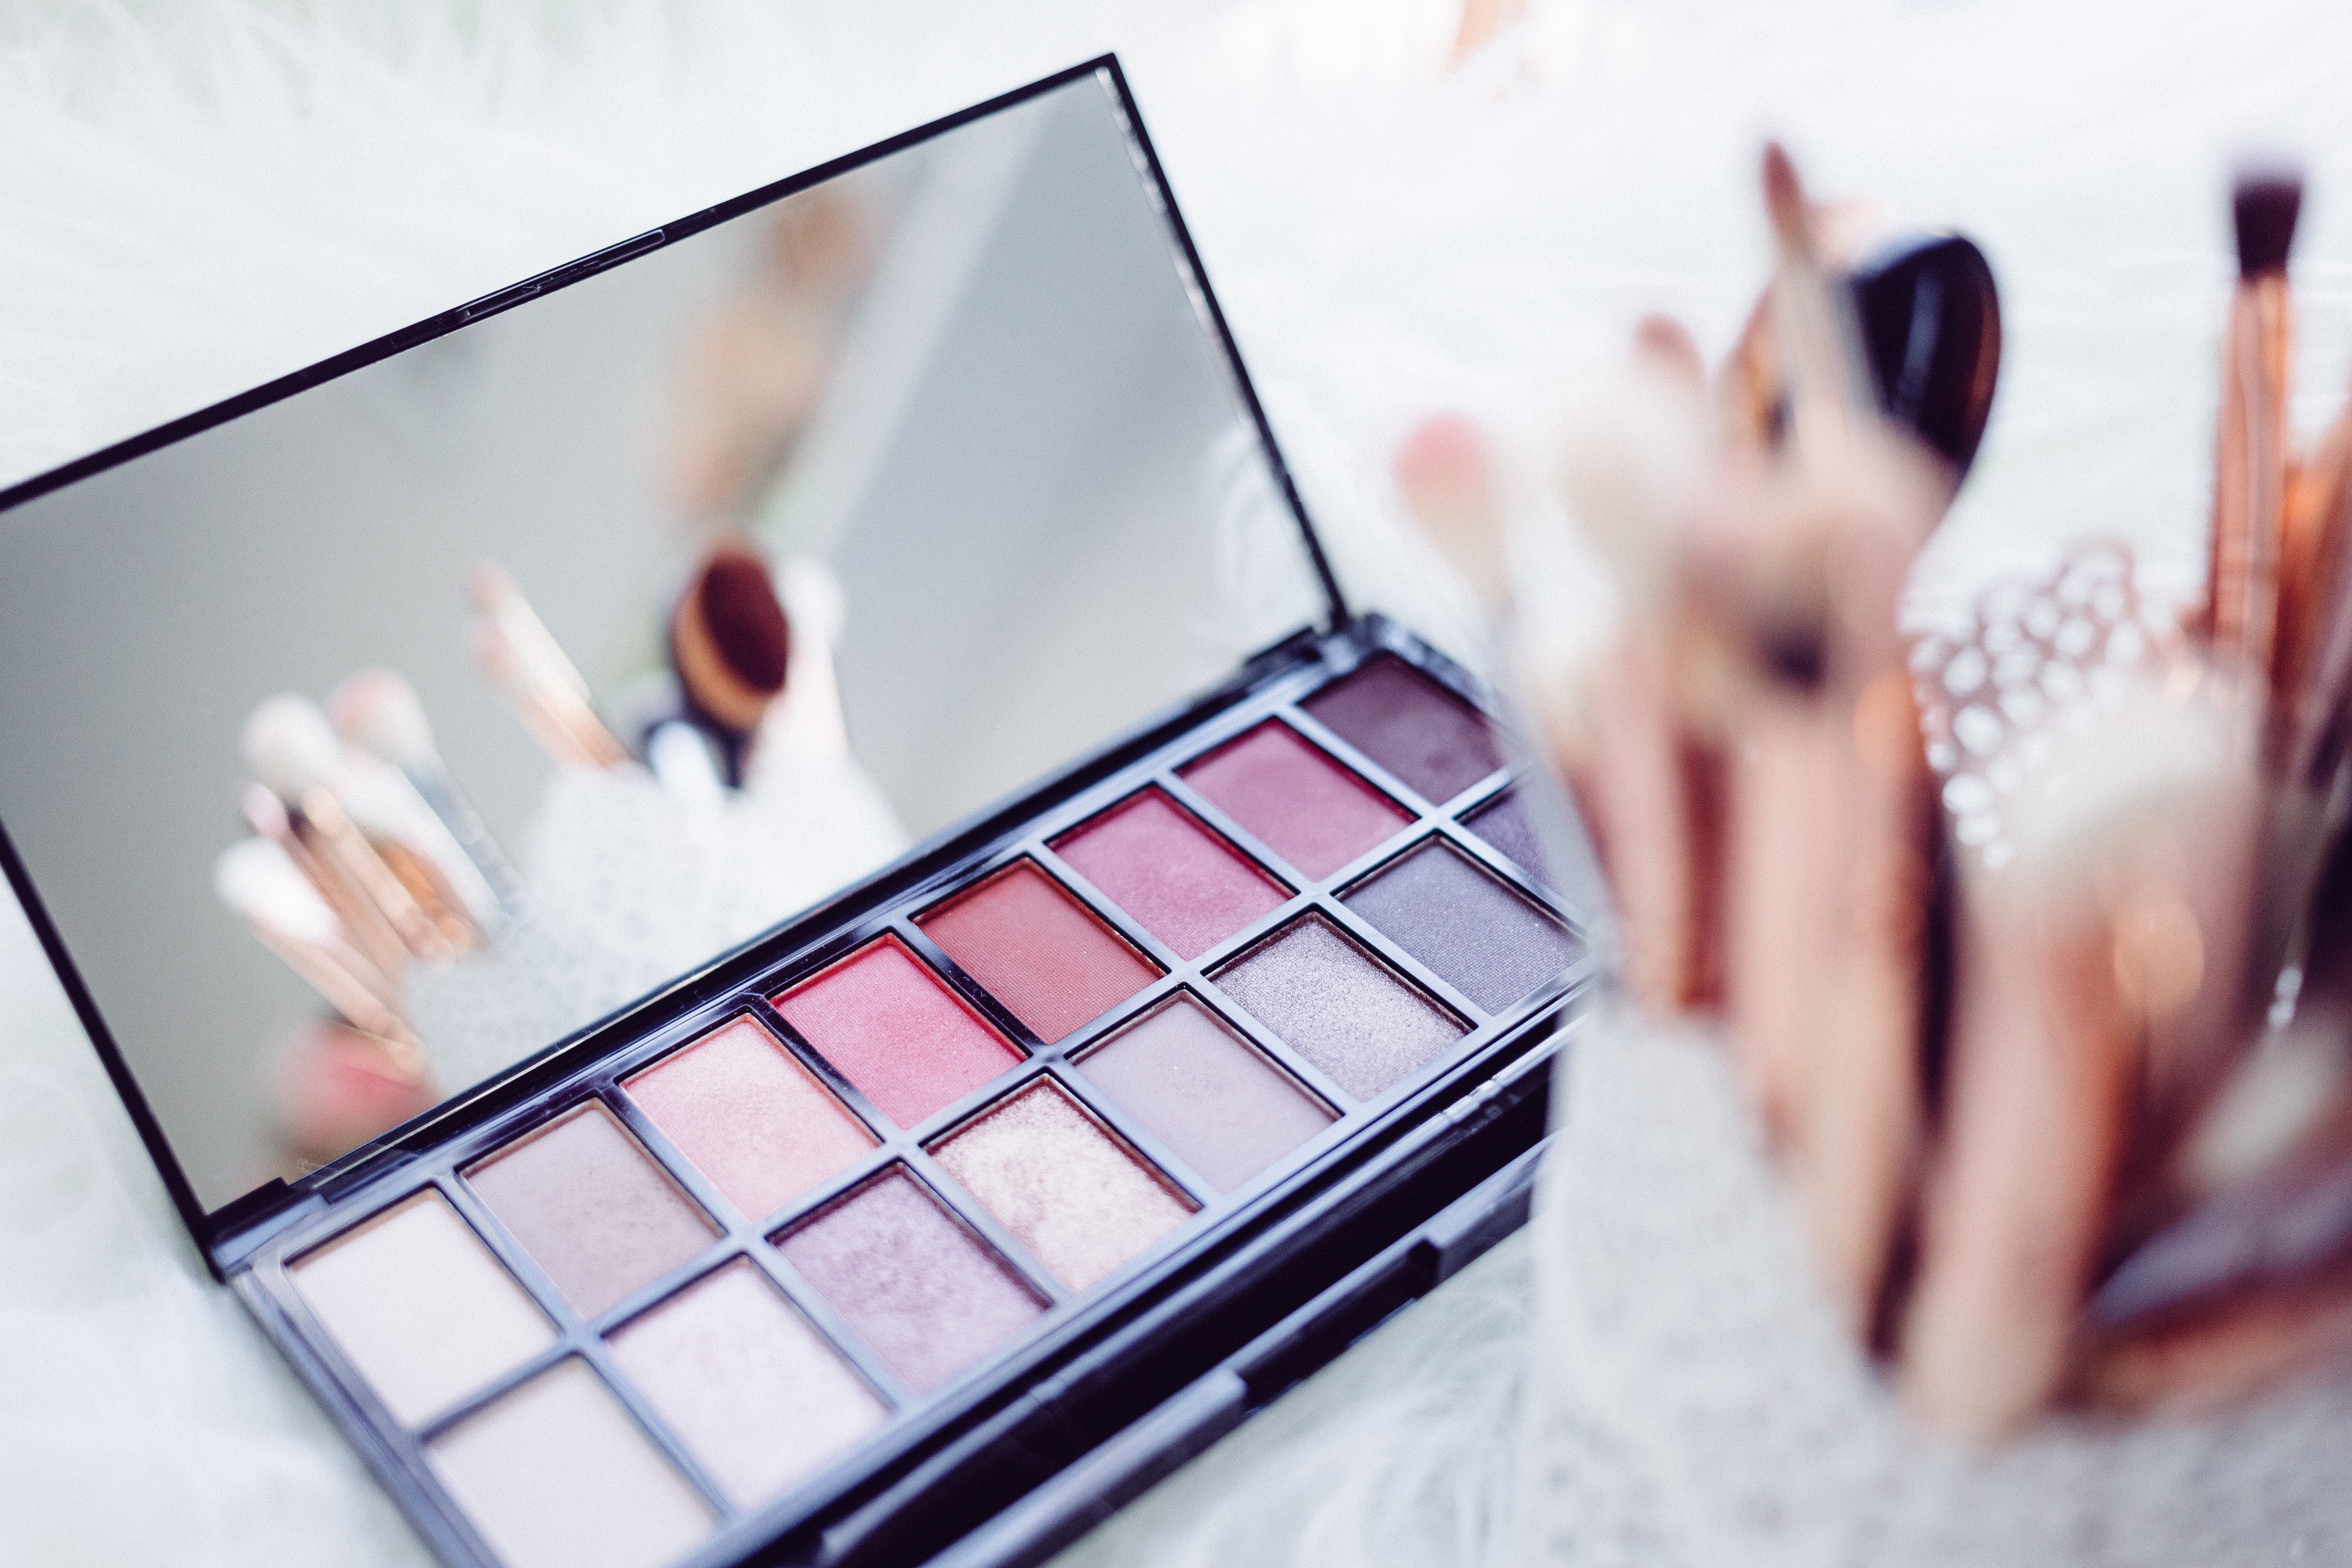 Find Hair And Makeup Artists in   Thornlands Get the best prices from 2,000+ of the most reviewed Hair And Makeup Artists  near Thornlands. Pick from mobile stylists or salons.